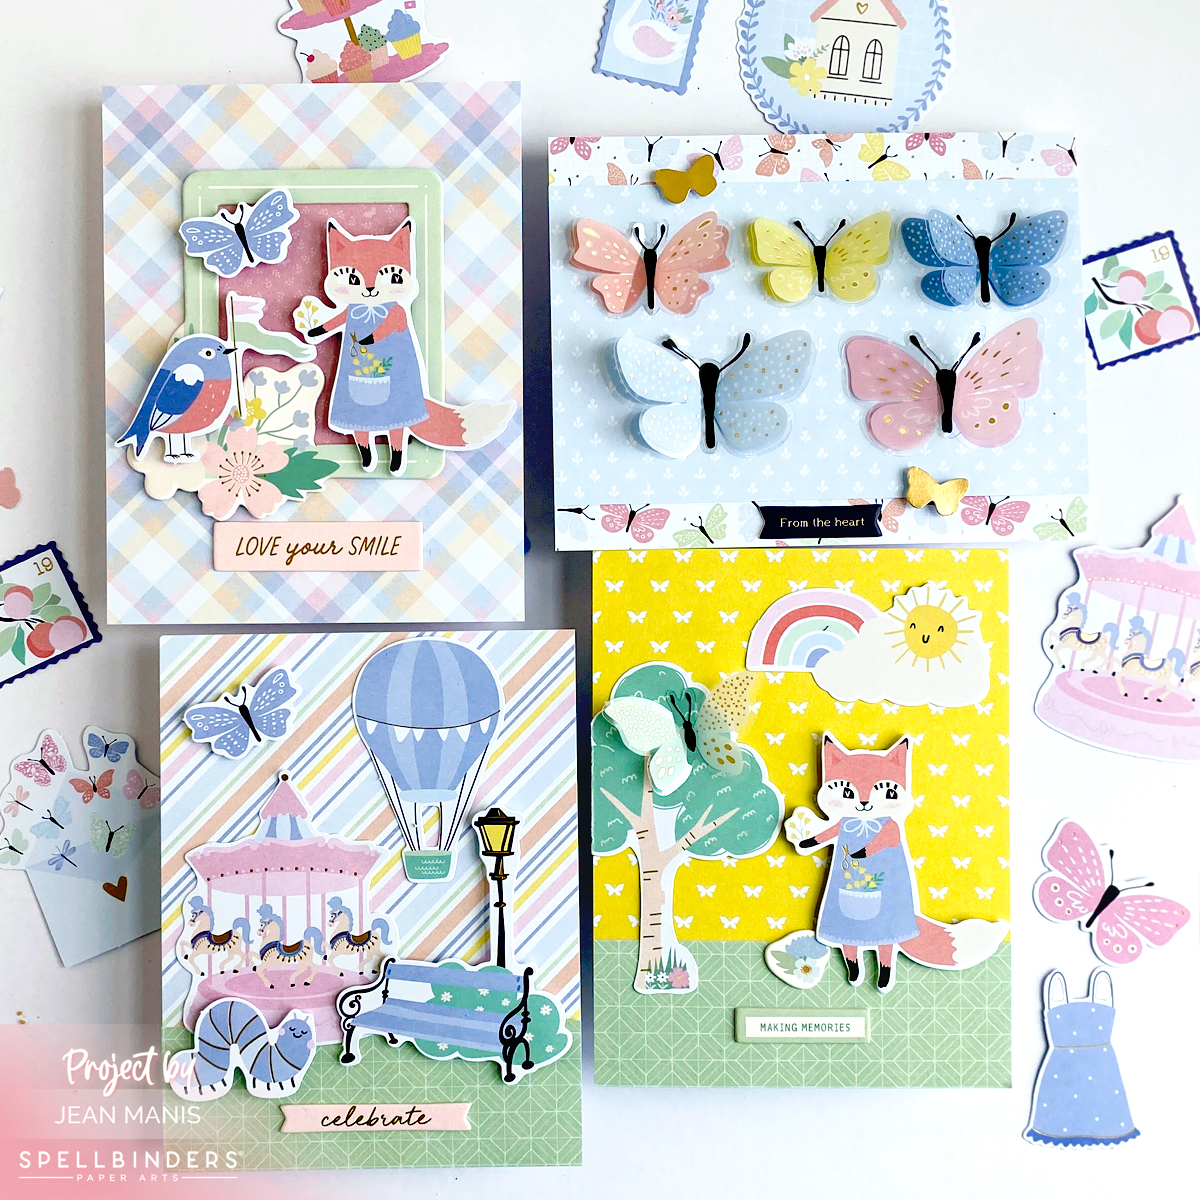 The Enchanting World of “A Little Hello” | Spellbinders Quick and Easy Card Kit